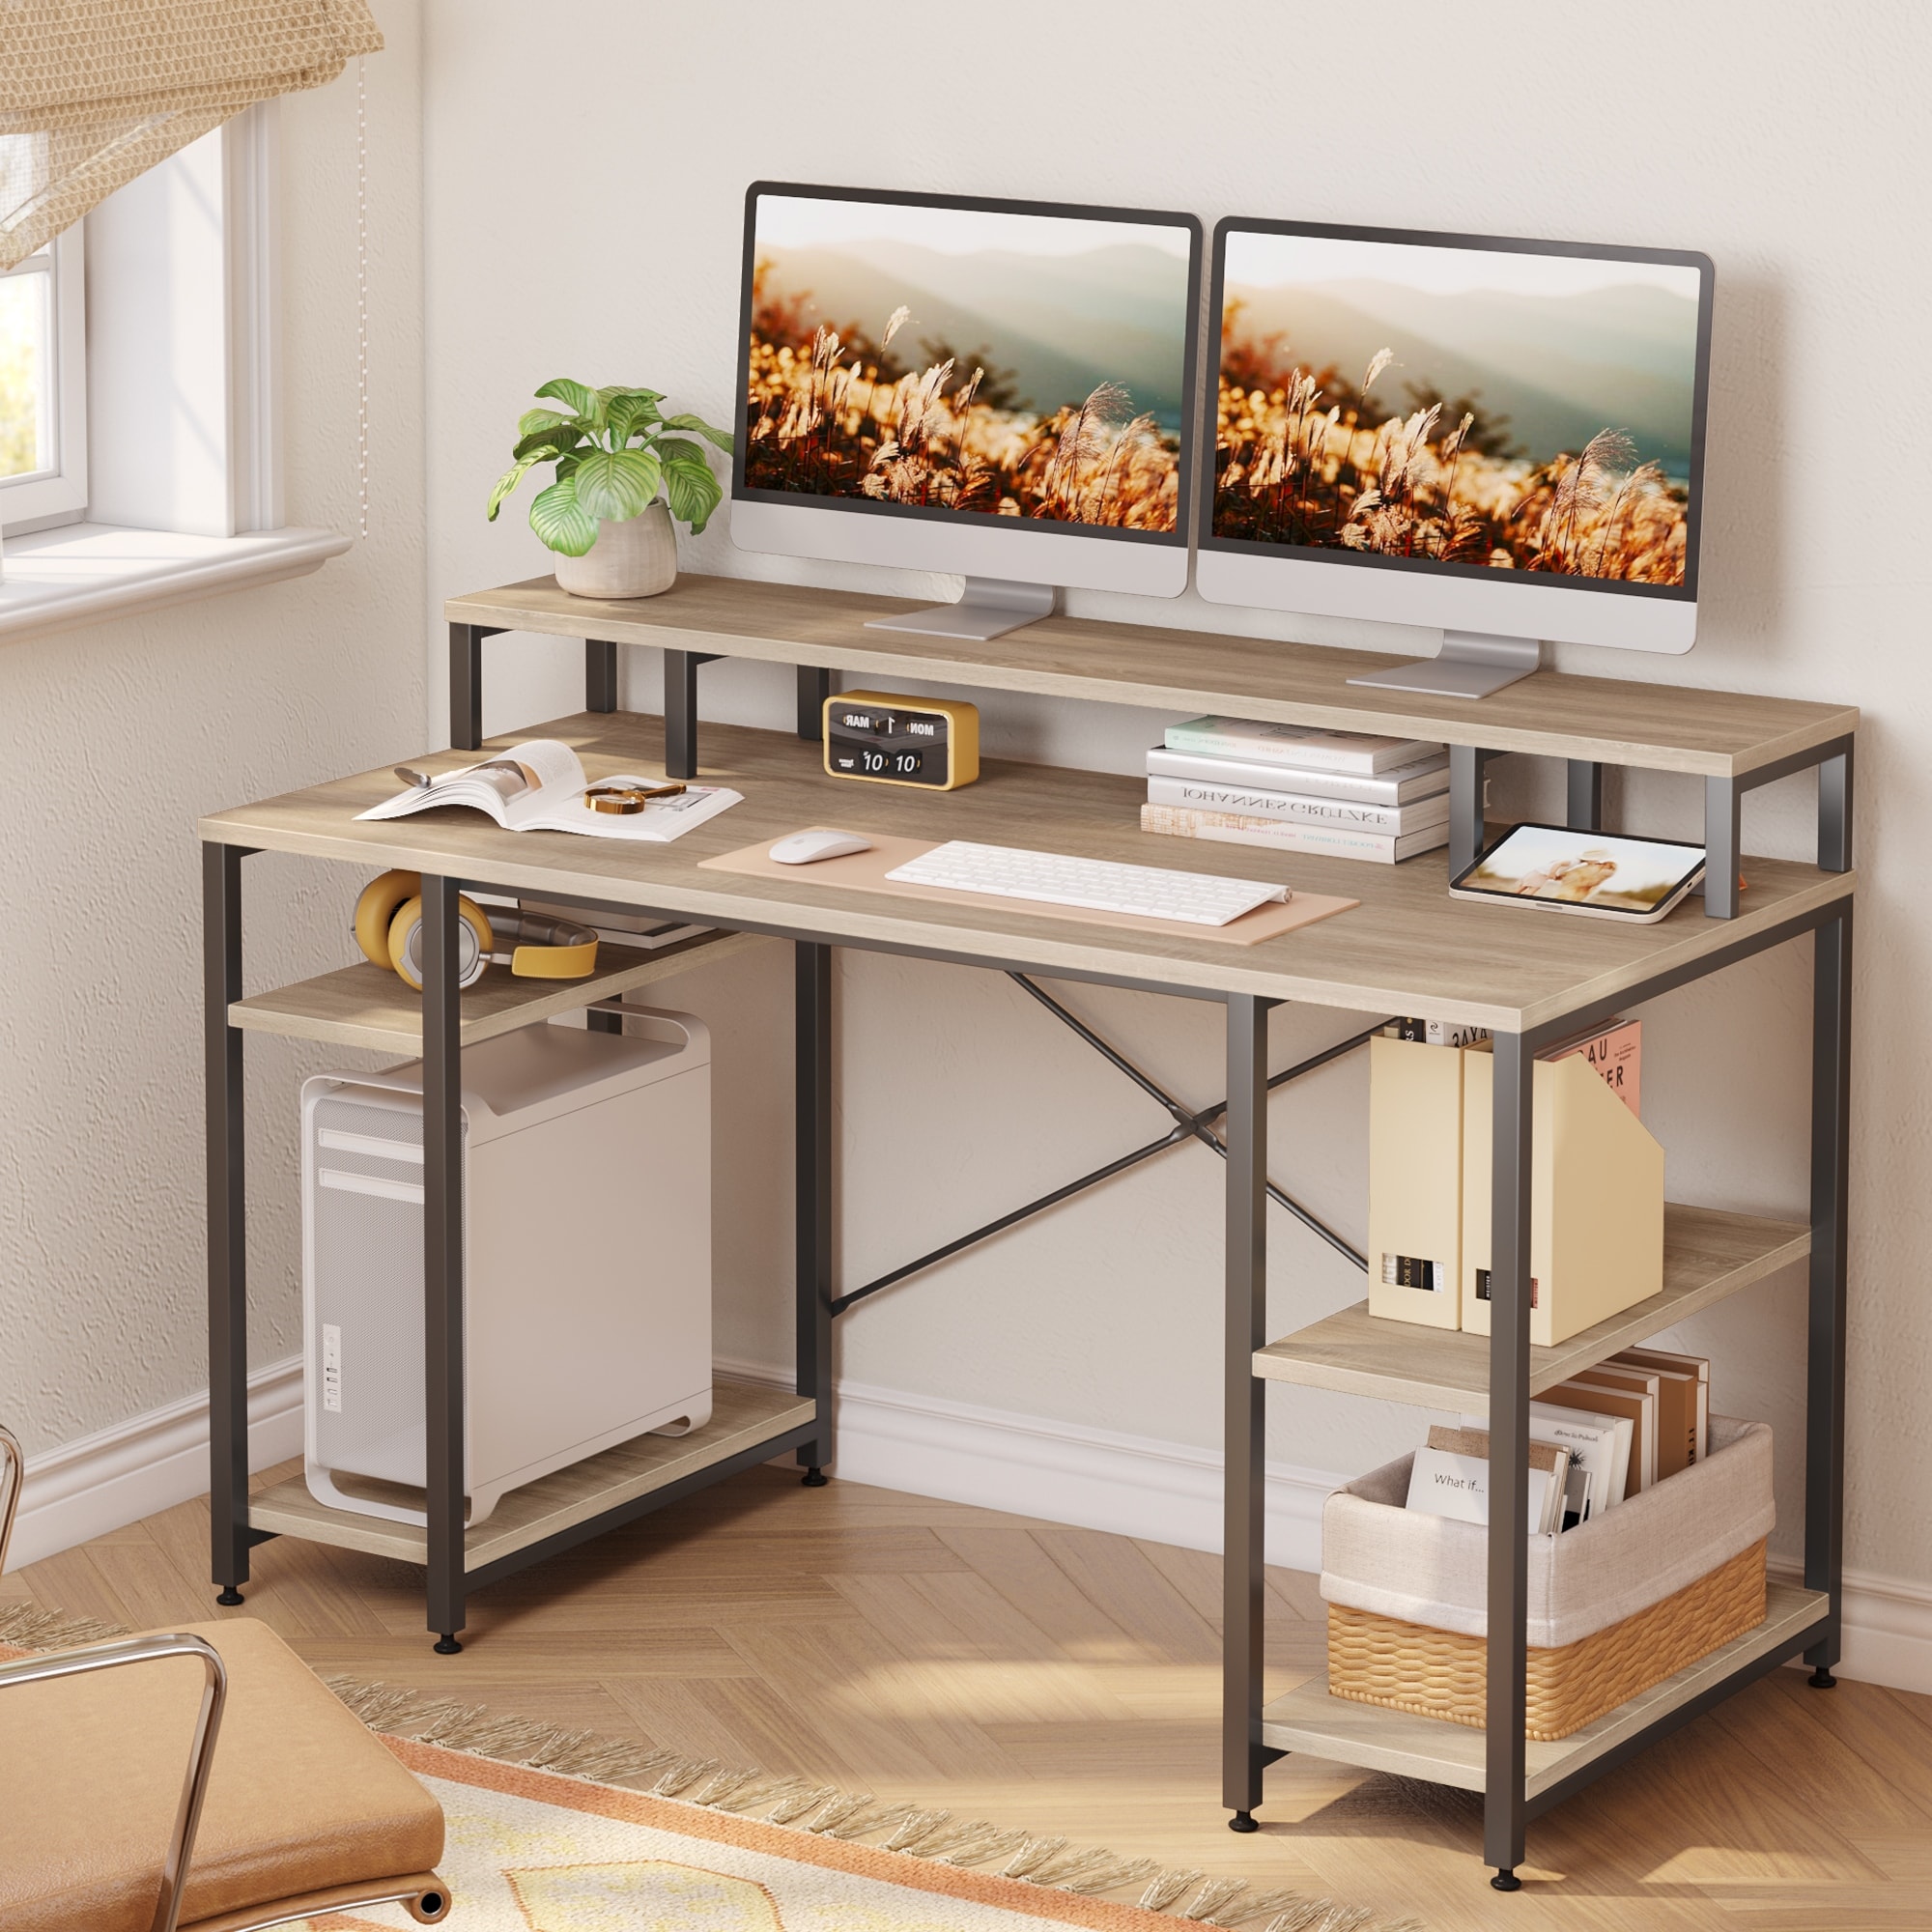 https://ak1.ostkcdn.com/images/products/is/images/direct/650afceaa29c89b9960ea2cc20bbc4af79ec4ad1/55-Inch-Dual-Monitor-Computer-Desk-with-Adjustable-Shelves.jpg